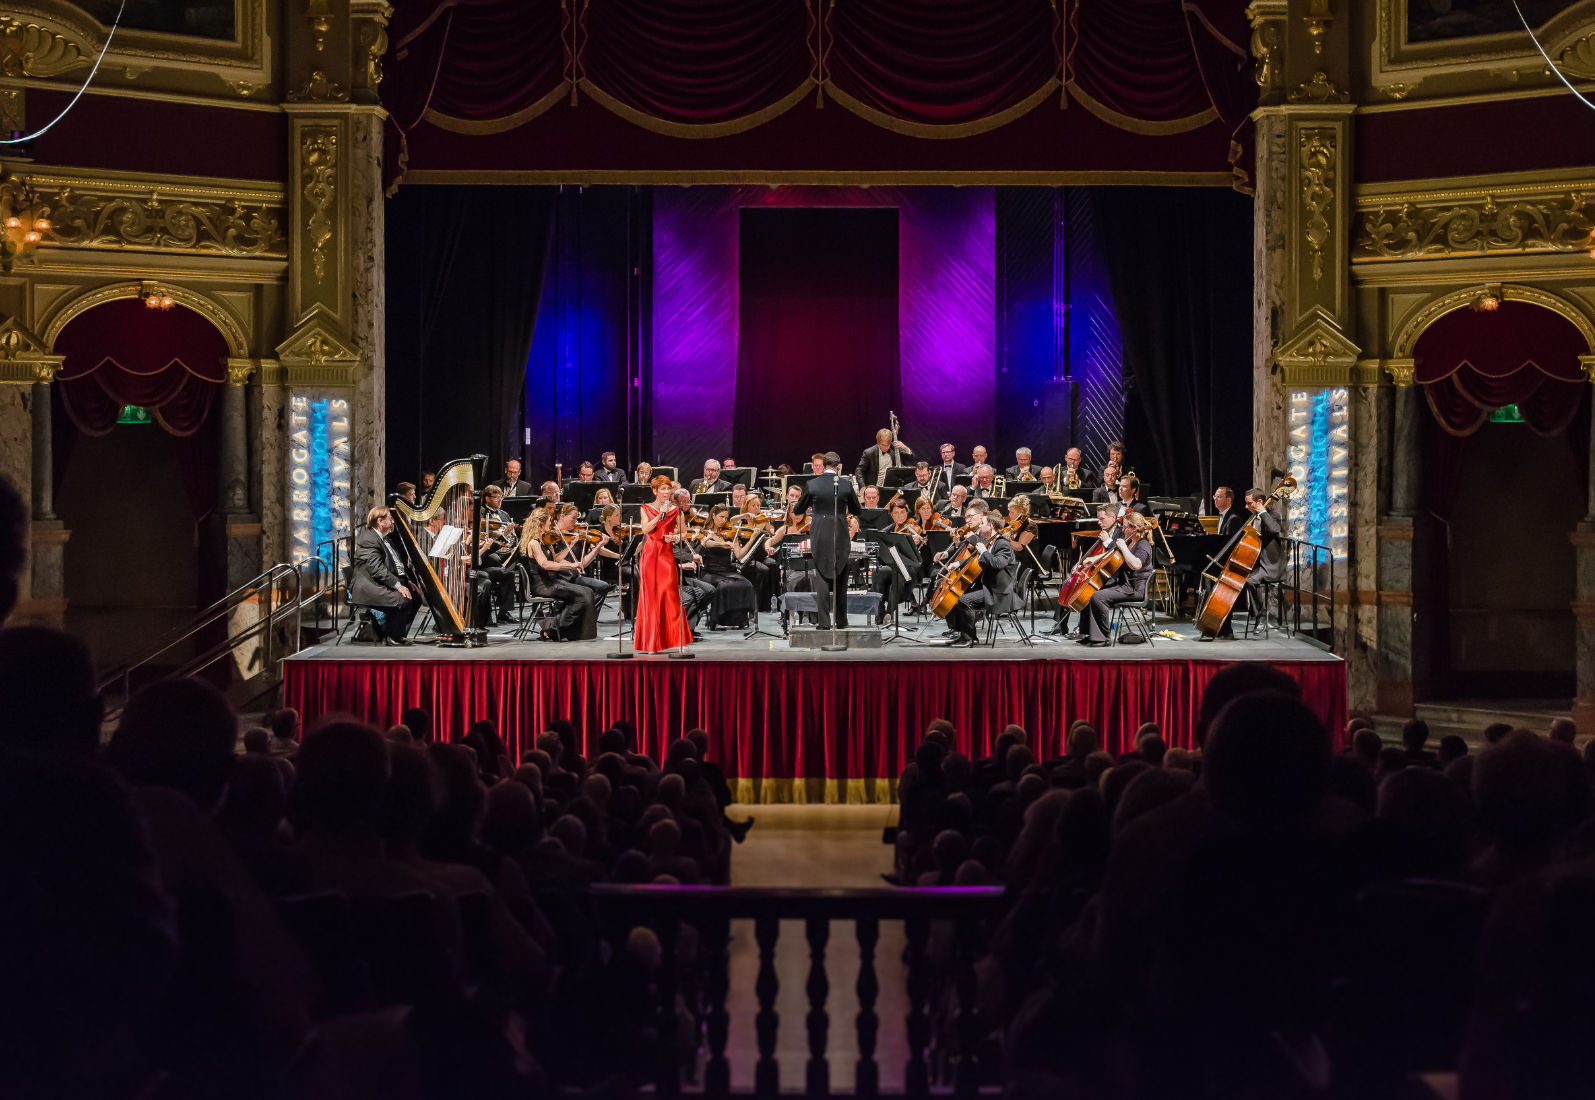 The John Wilson Orchestra performing at the Royal Hall as part of the Harrogate International Festival